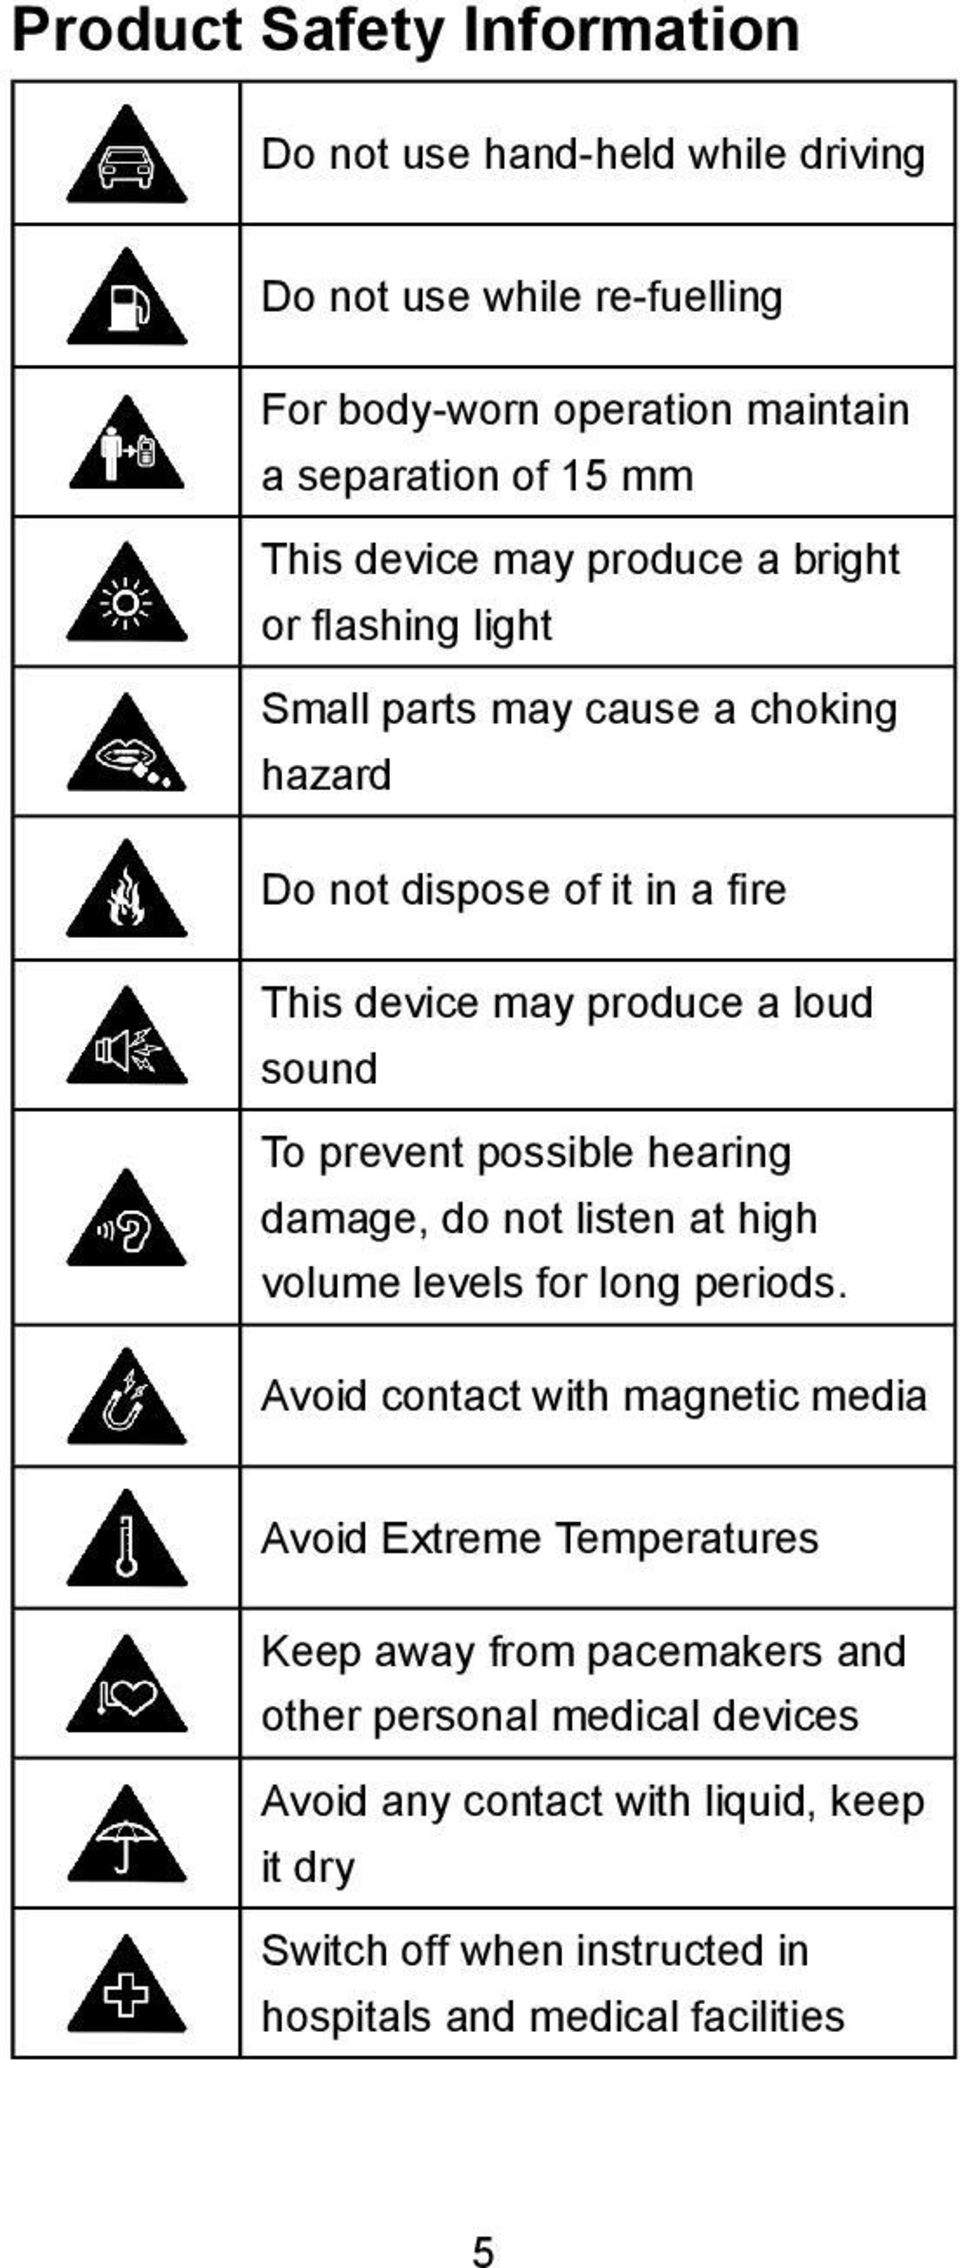 prevent possible hearing damage, do not listen at high volume levels for long periods.